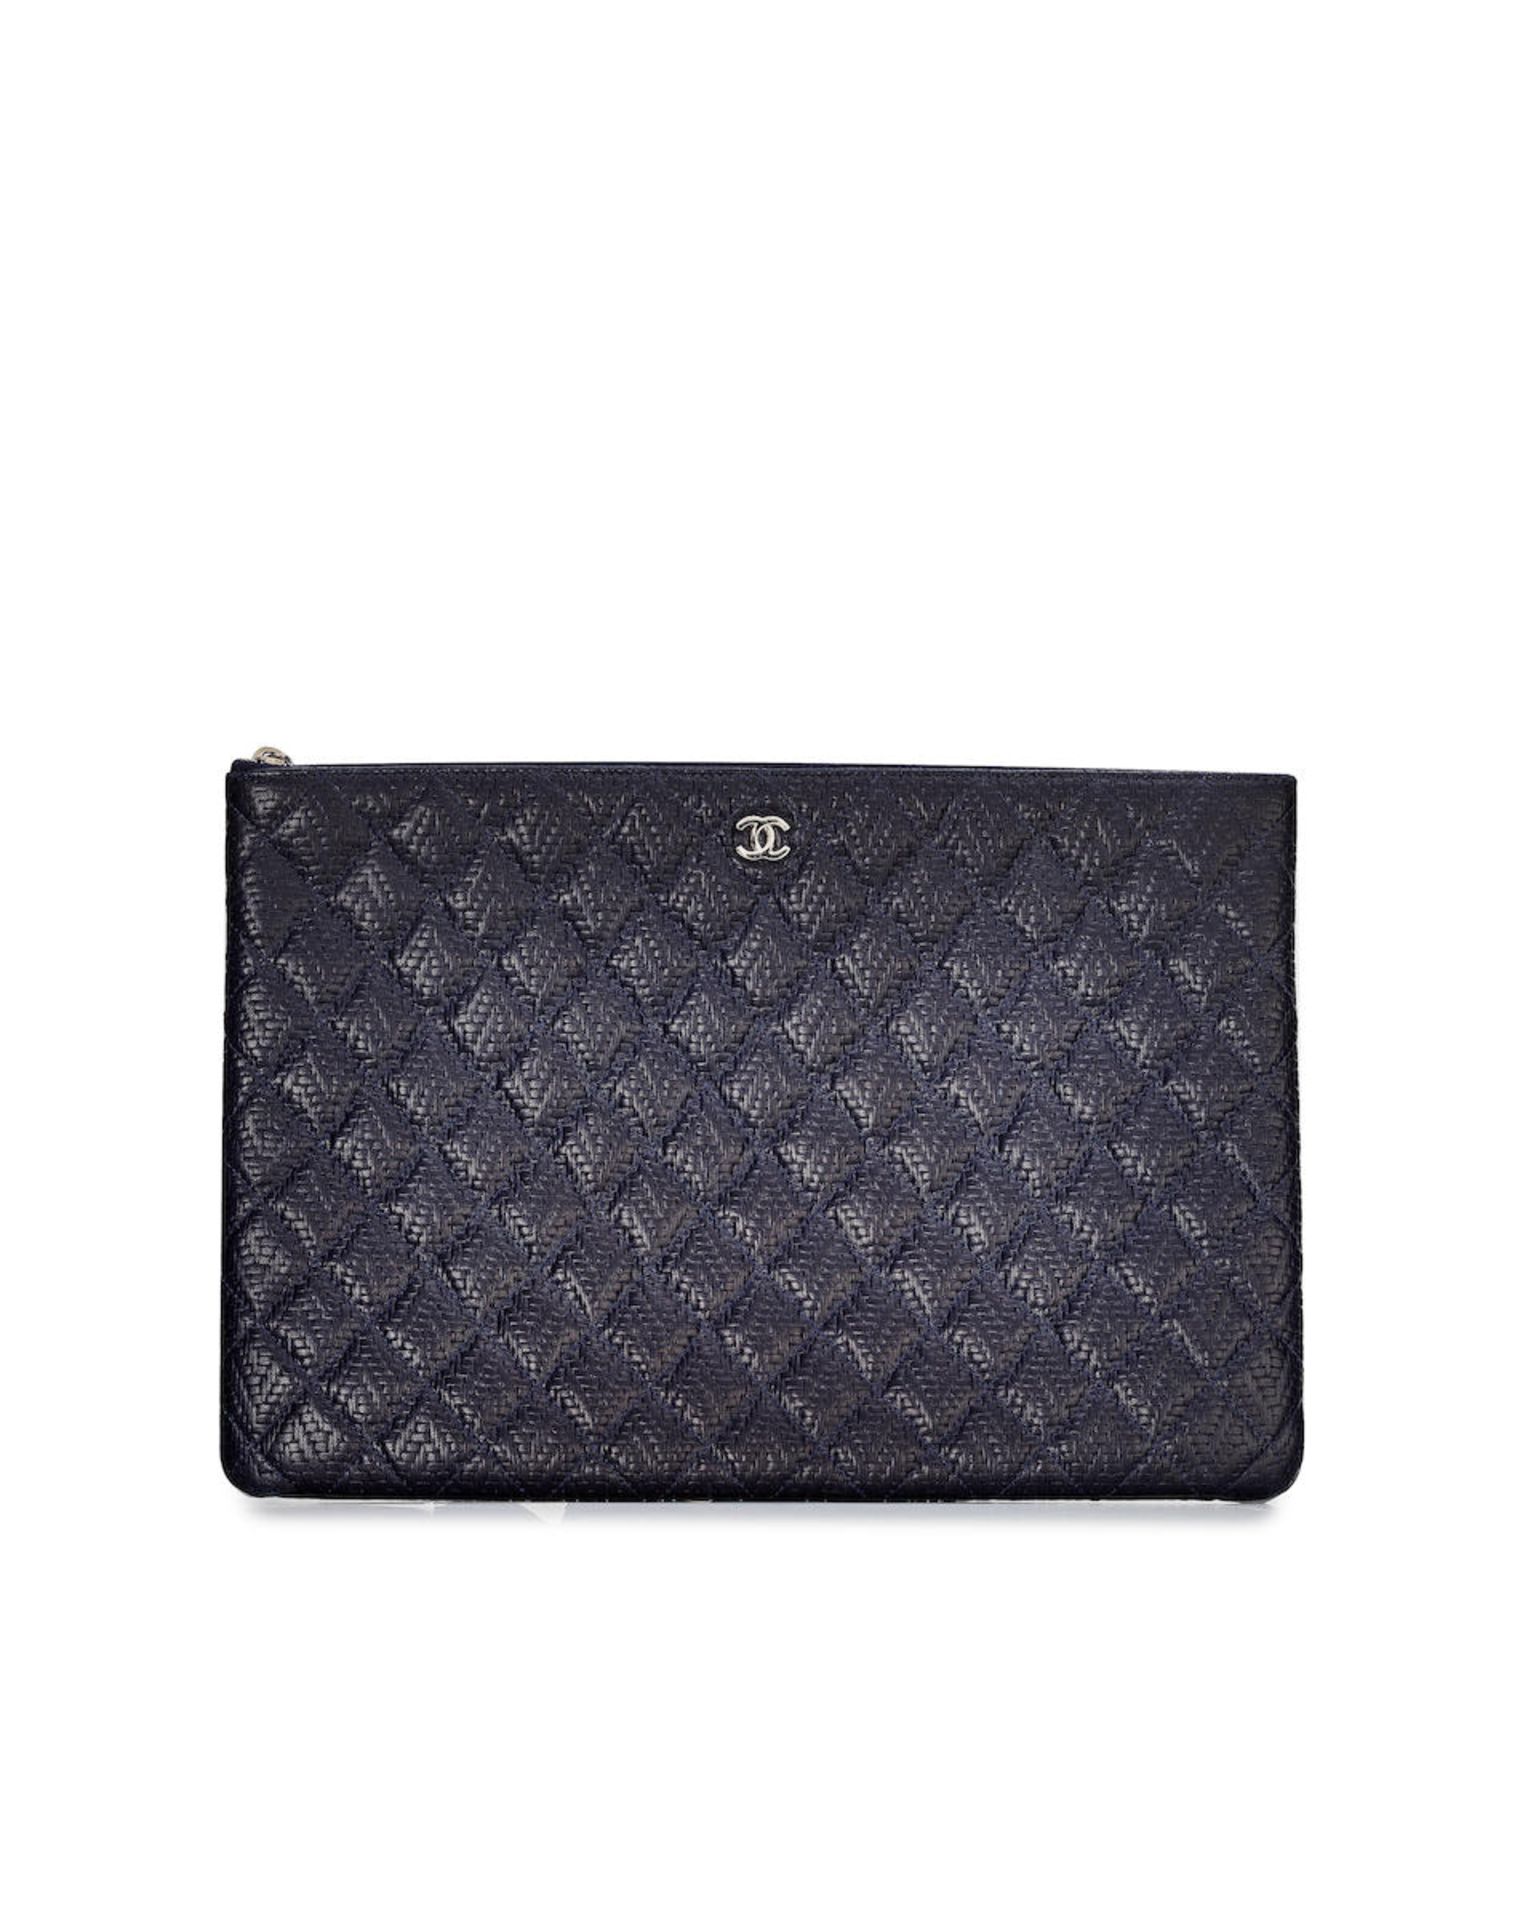 [NO RESERVE] CHANEL: NAVY CALFSKIN QUILTED CLUTCH BAG WITH SILVER TONED HARDWARE